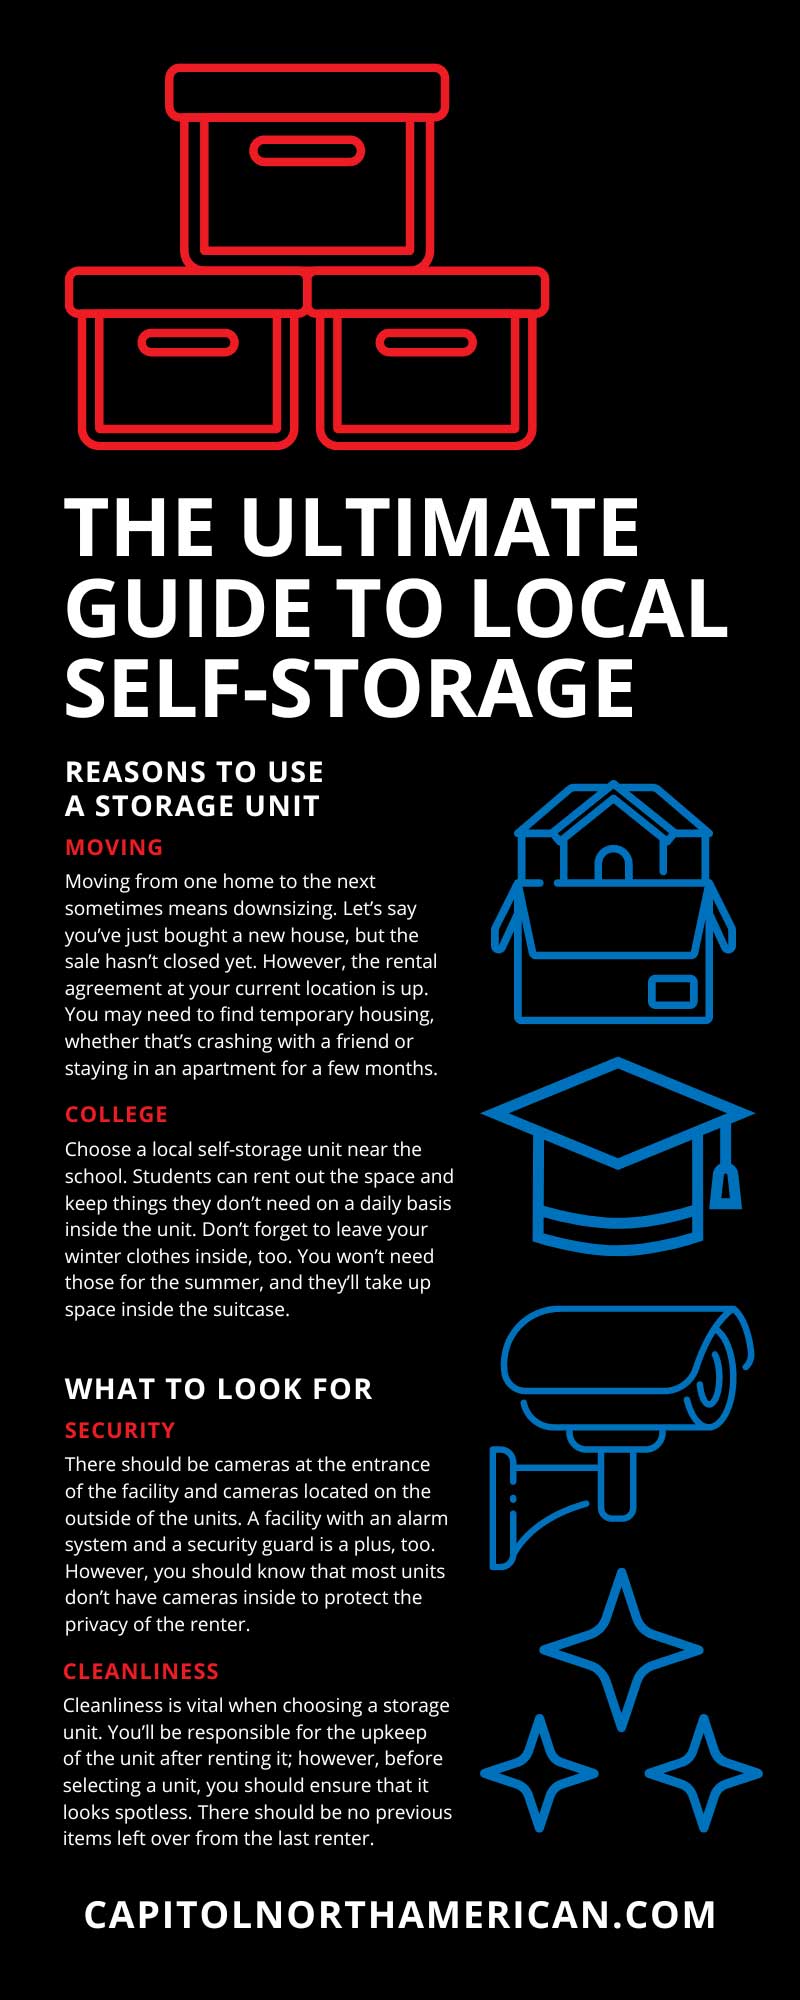 The Ultimate Guide to Local Self-Storage